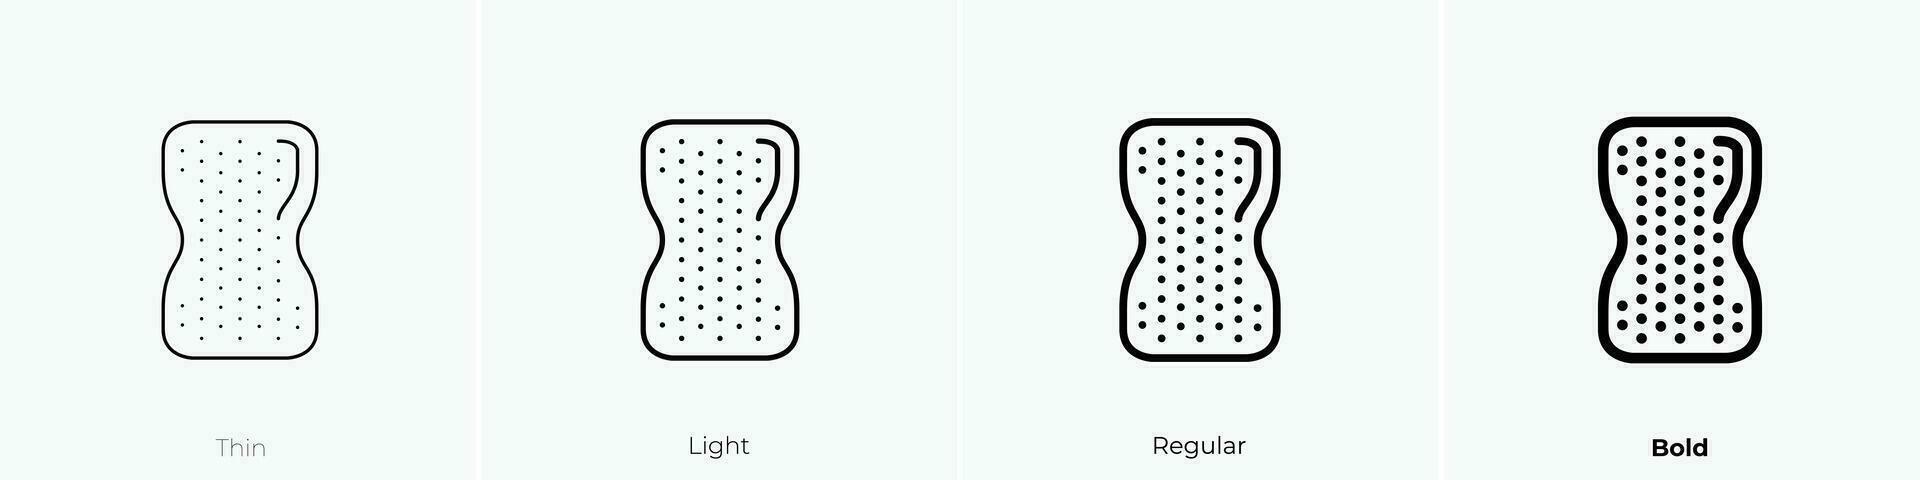 sponge icon. Thin, Light, Regular And Bold style design isolated on white background vector